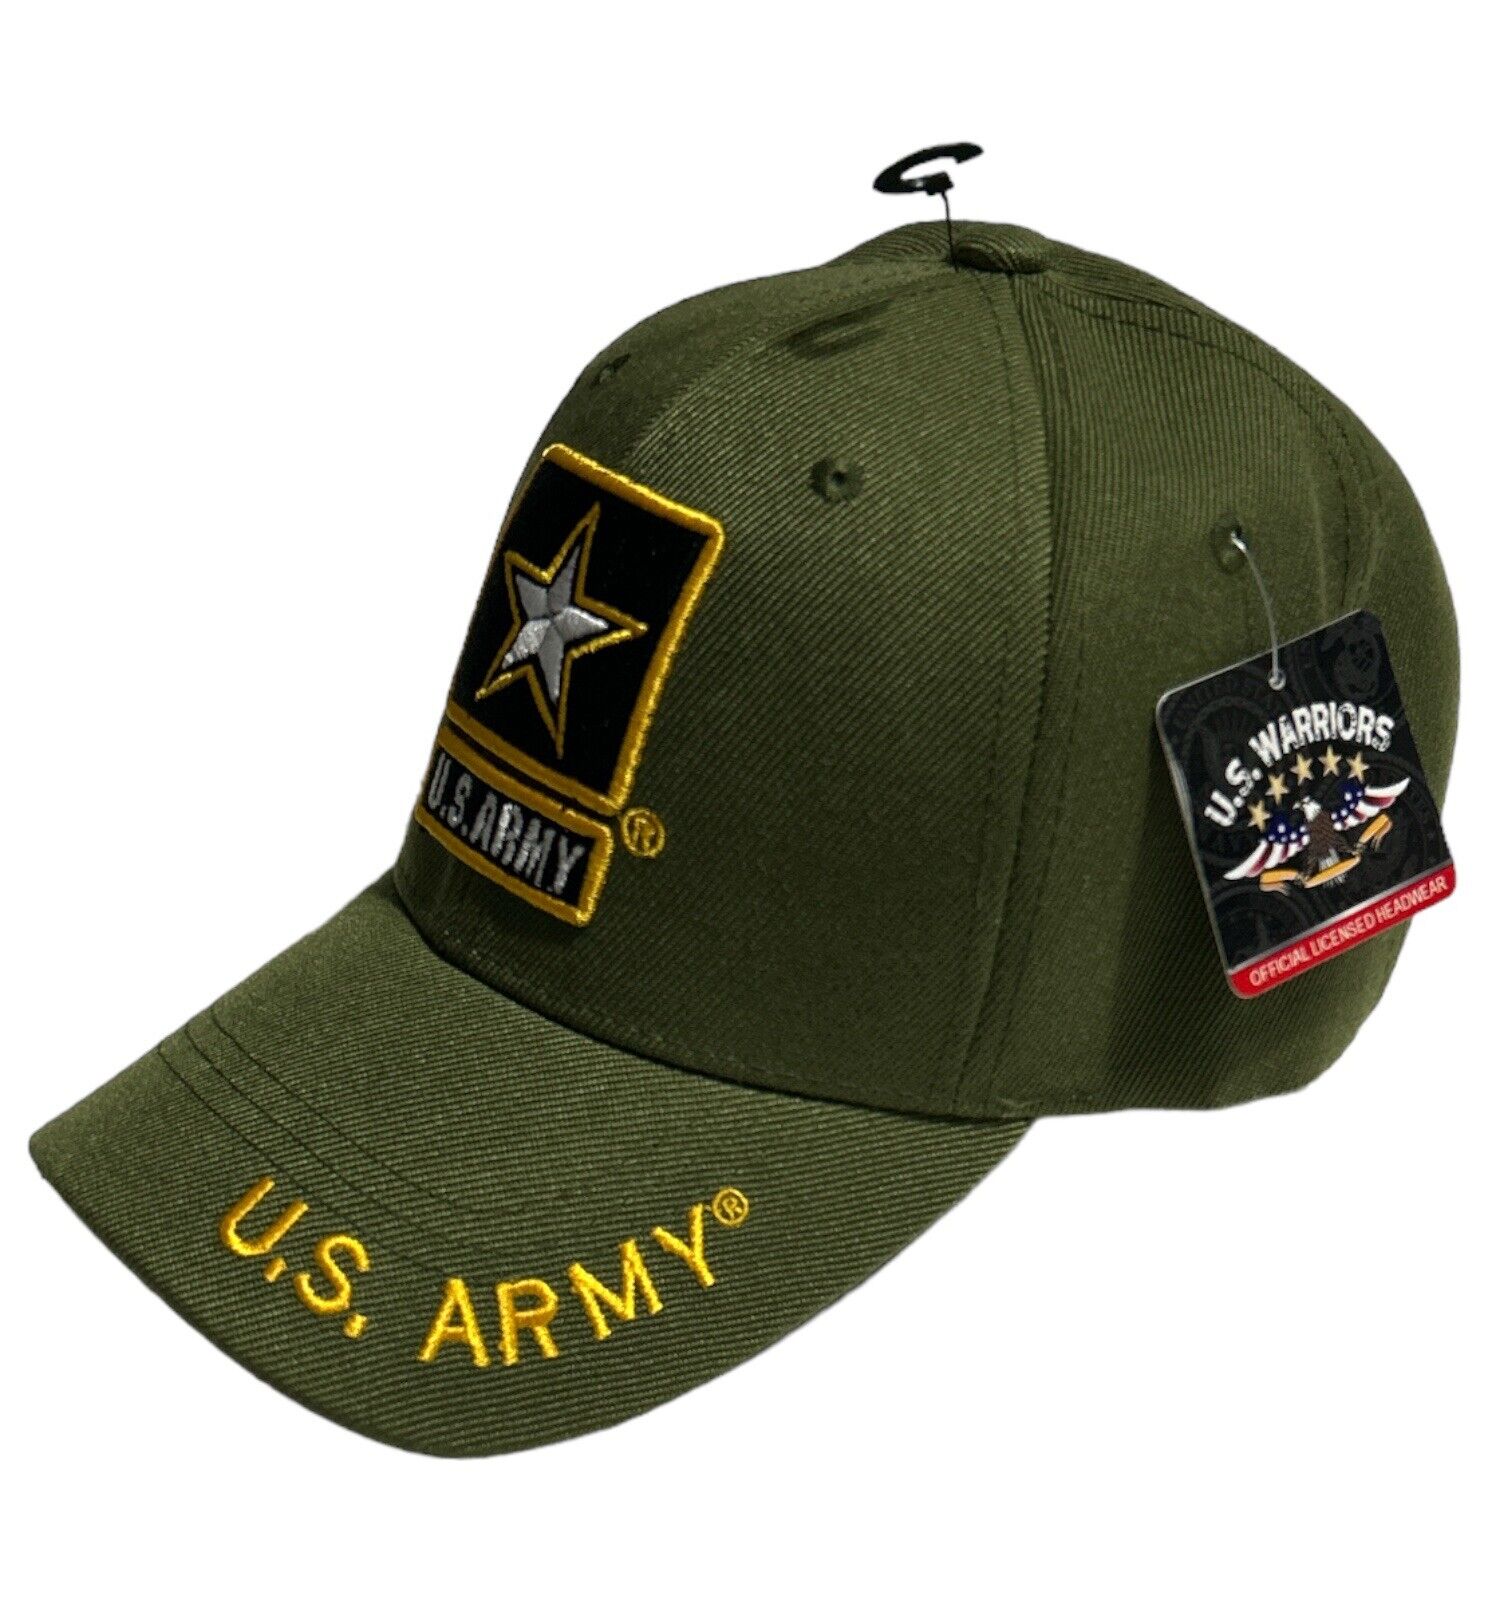 US Army Star Emblem Green Cap Embroidered Adjustable Polyester New Military Hat